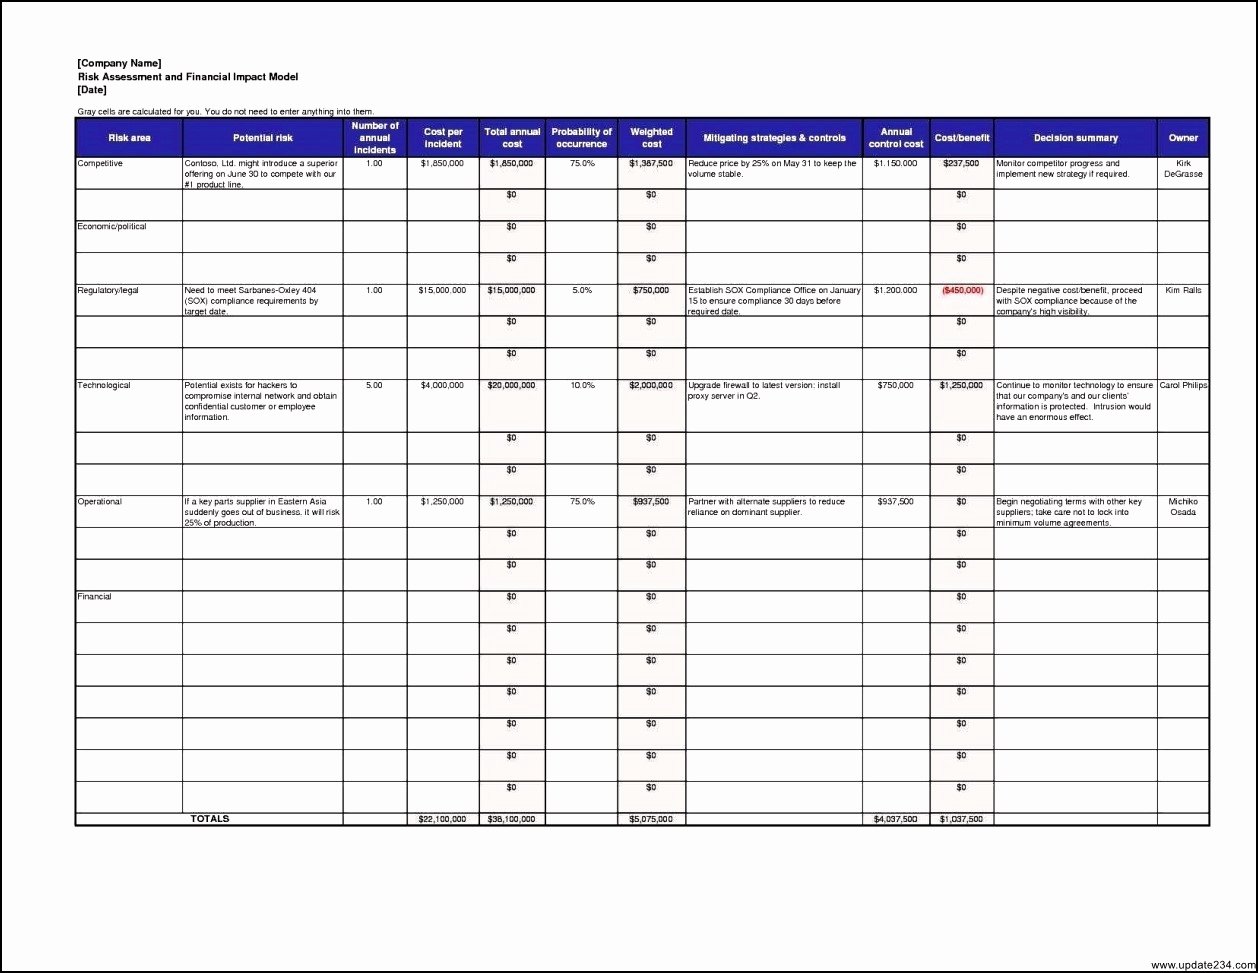 Risk Analysis Template Excel Beautiful Risk assessment Template Excel Template Update234